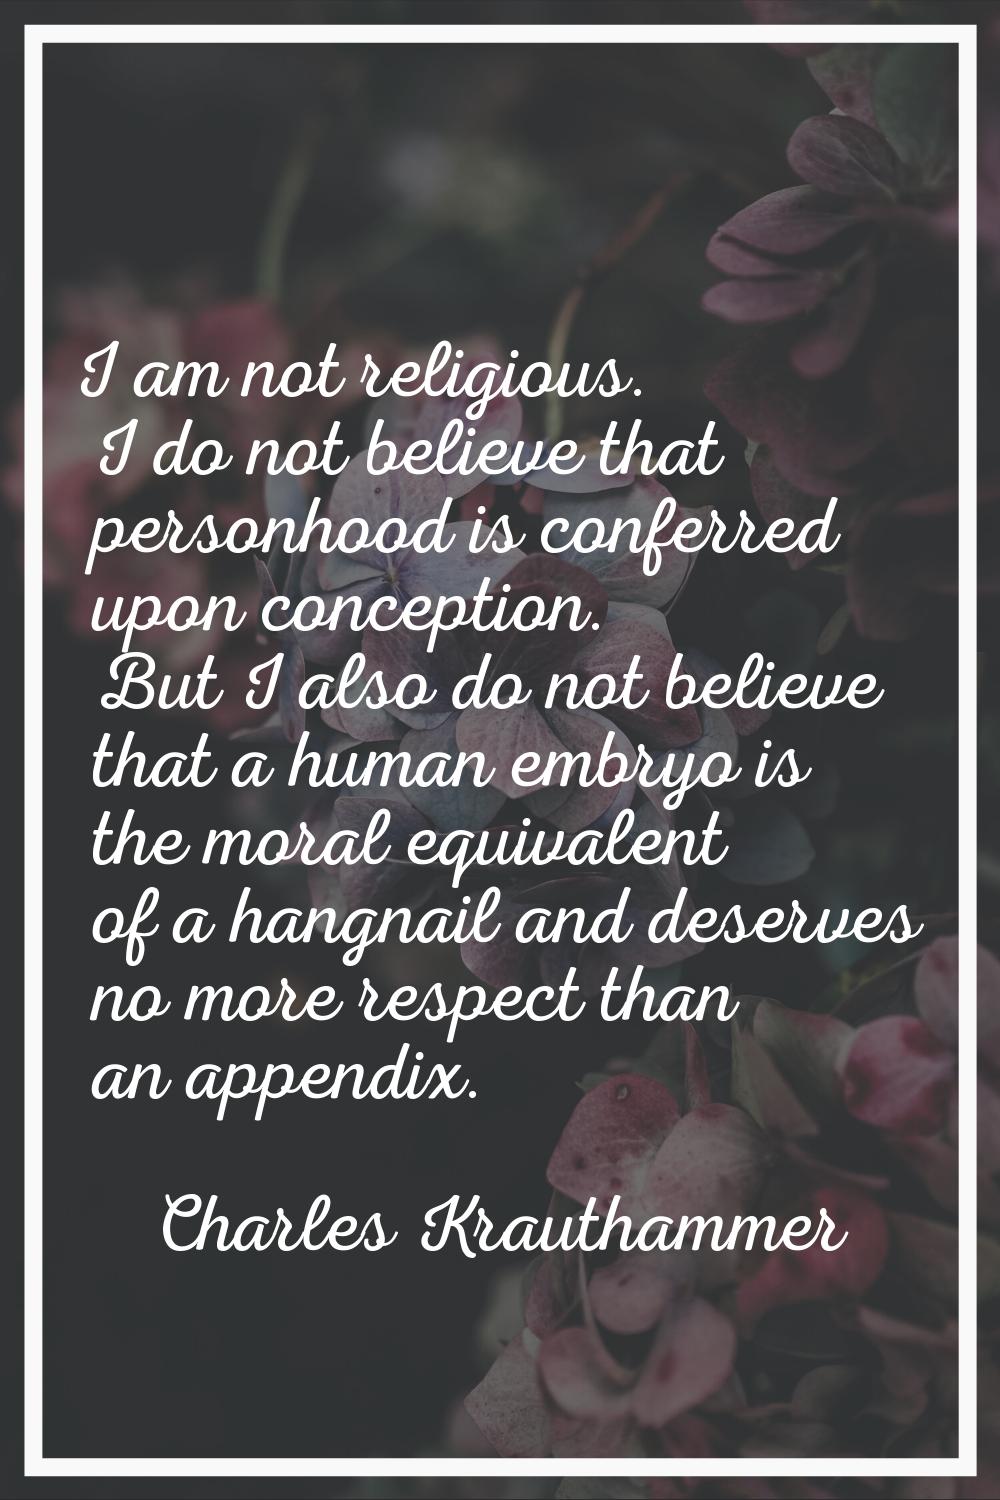 I am not religious. I do not believe that personhood is conferred upon conception. But I also do no